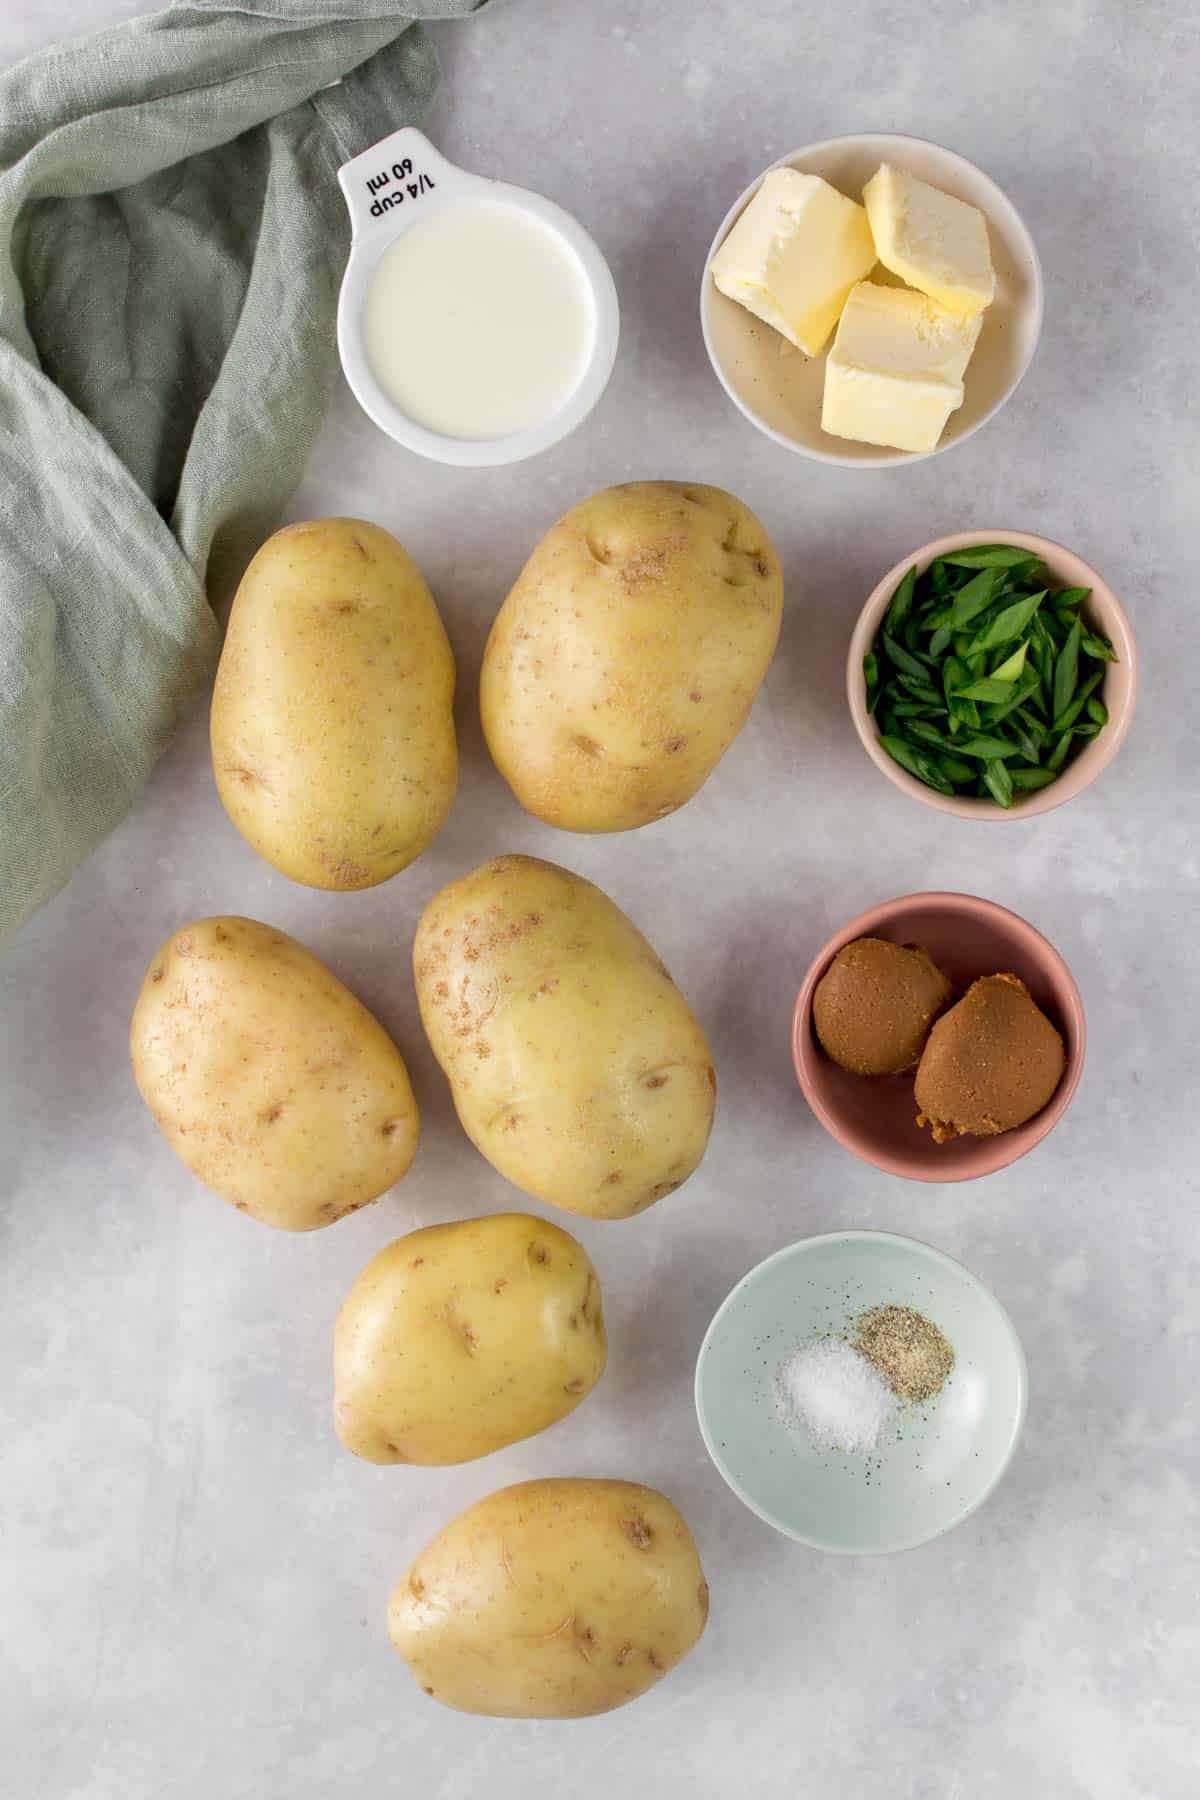 Ingredients needed to make miso mashed potatoes.